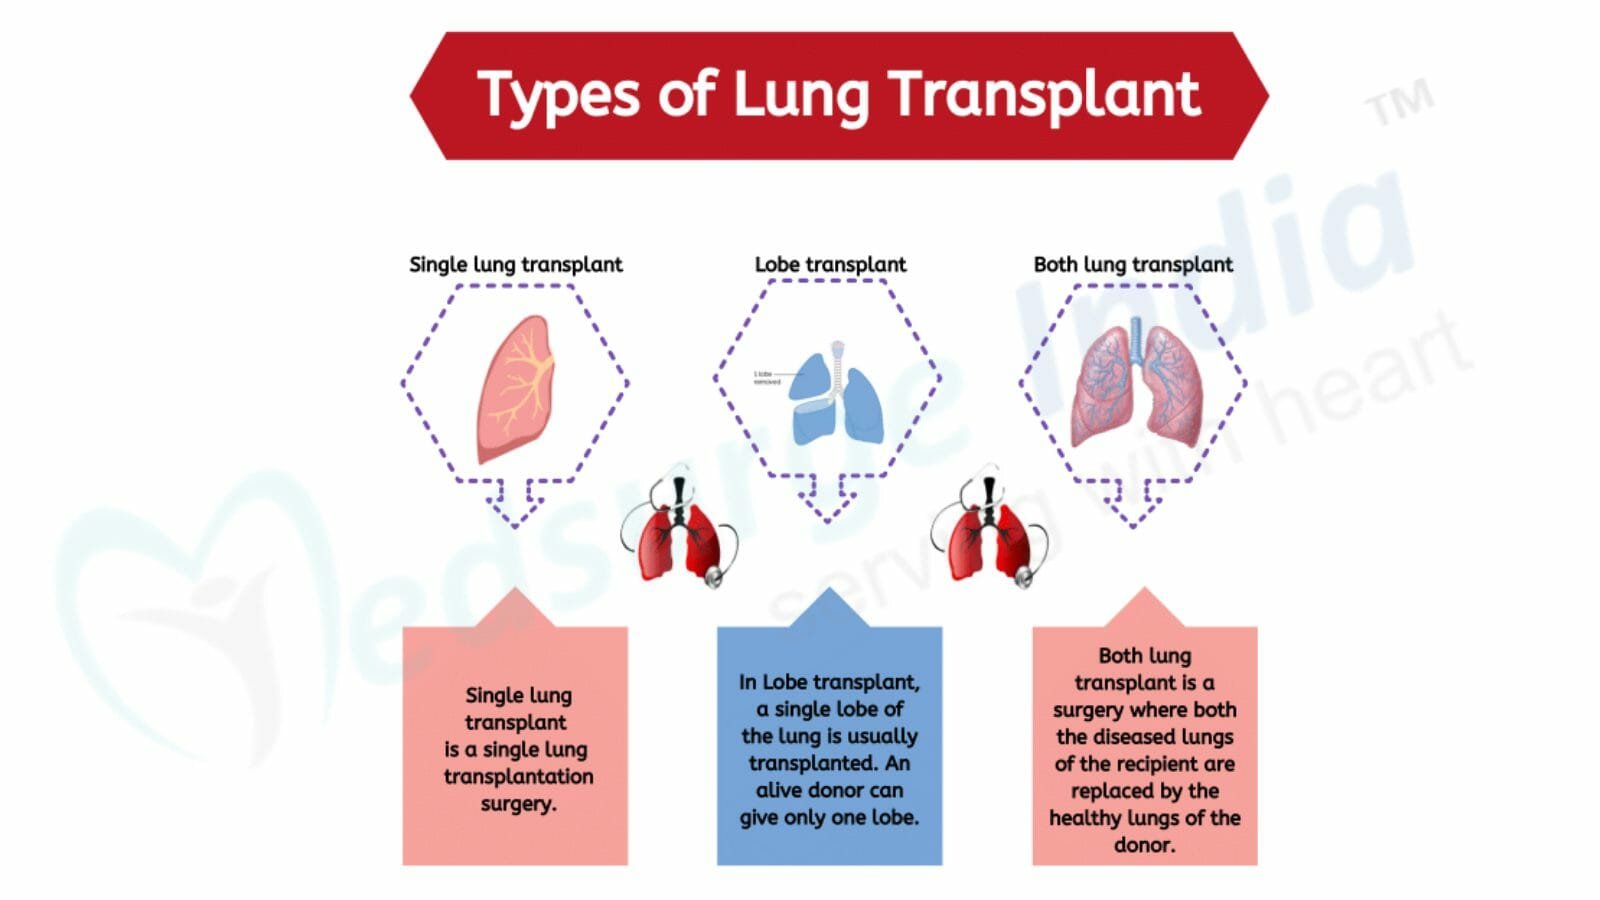 Types of Lung Transplant